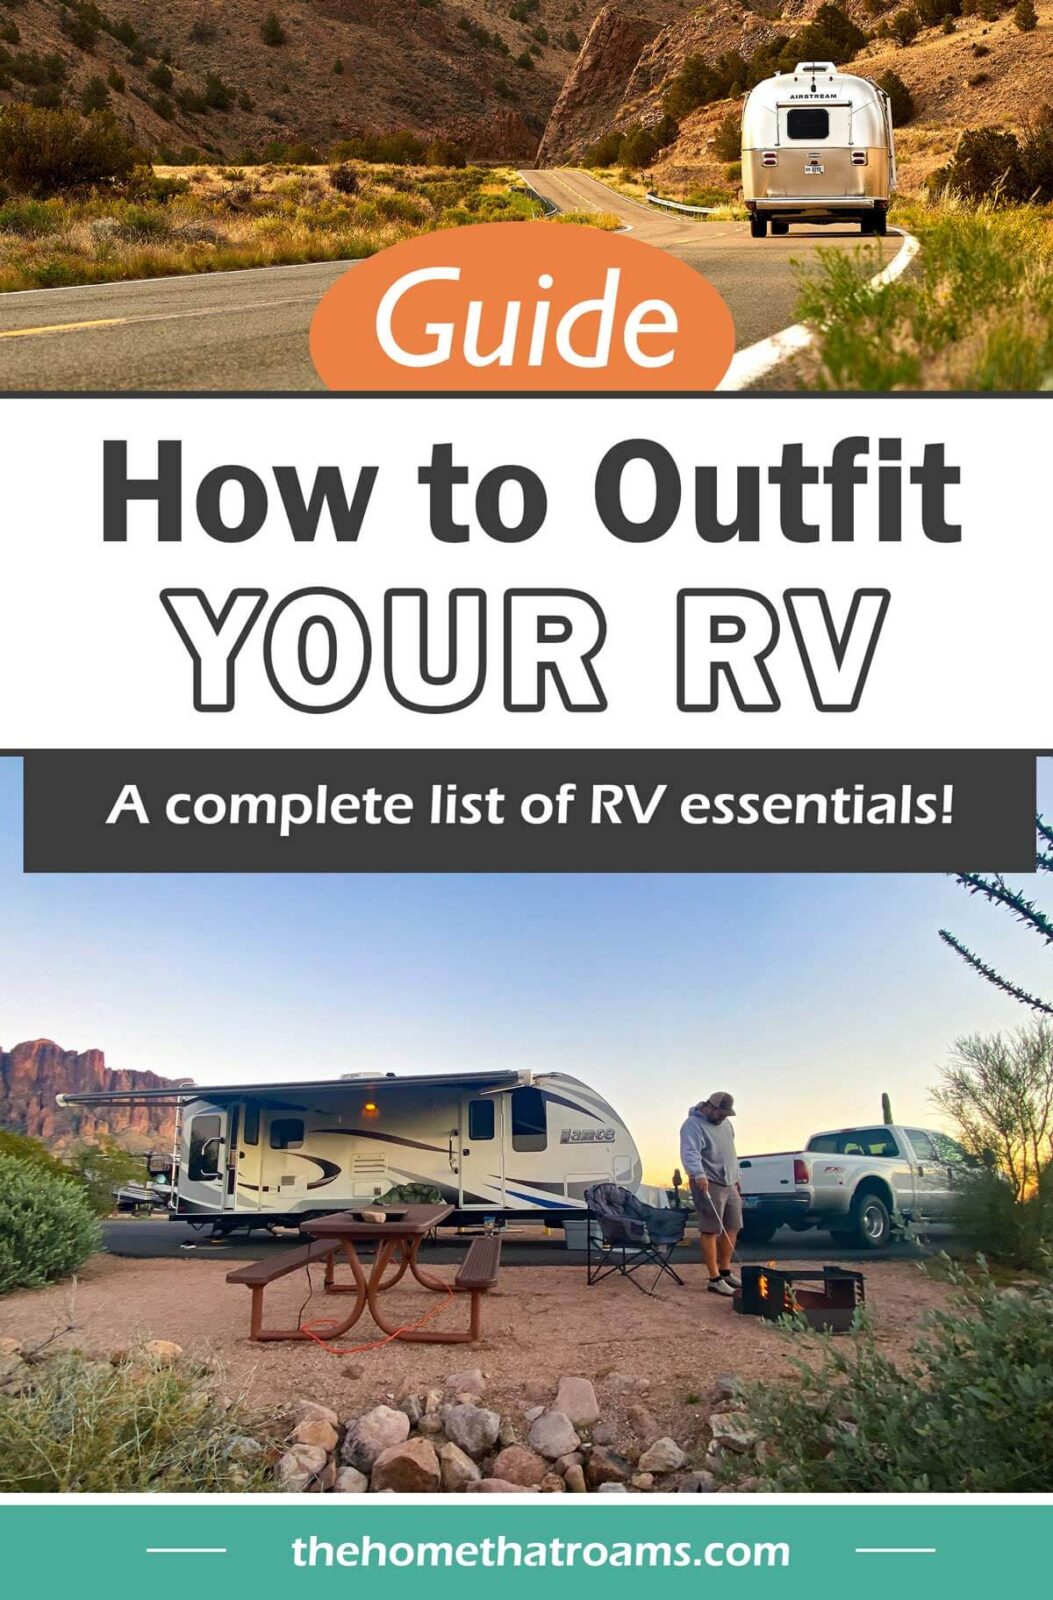 Pin image of (top) RV travel trailer driving down a rural road (bottom) RV travel trailer and truck at RV campsite in Arizona - overlay "Guide, How to Outfit Your RV - A complete list of RV essentials!"